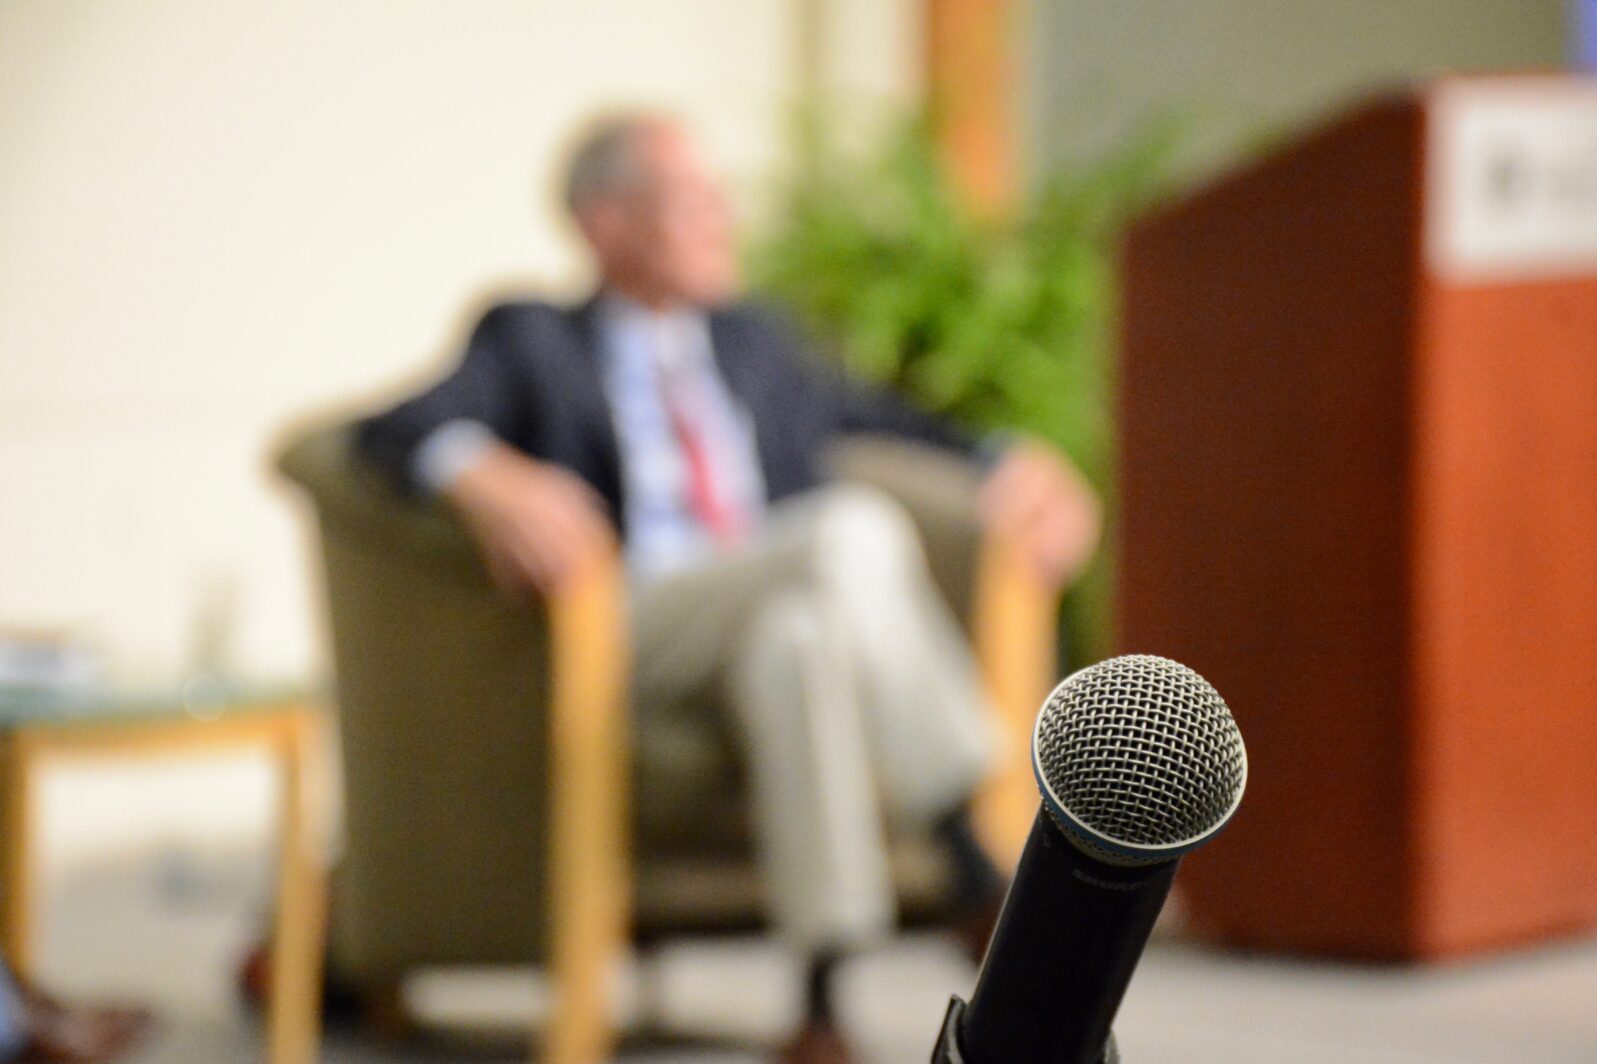 George Gilder with a microphone in the foreground